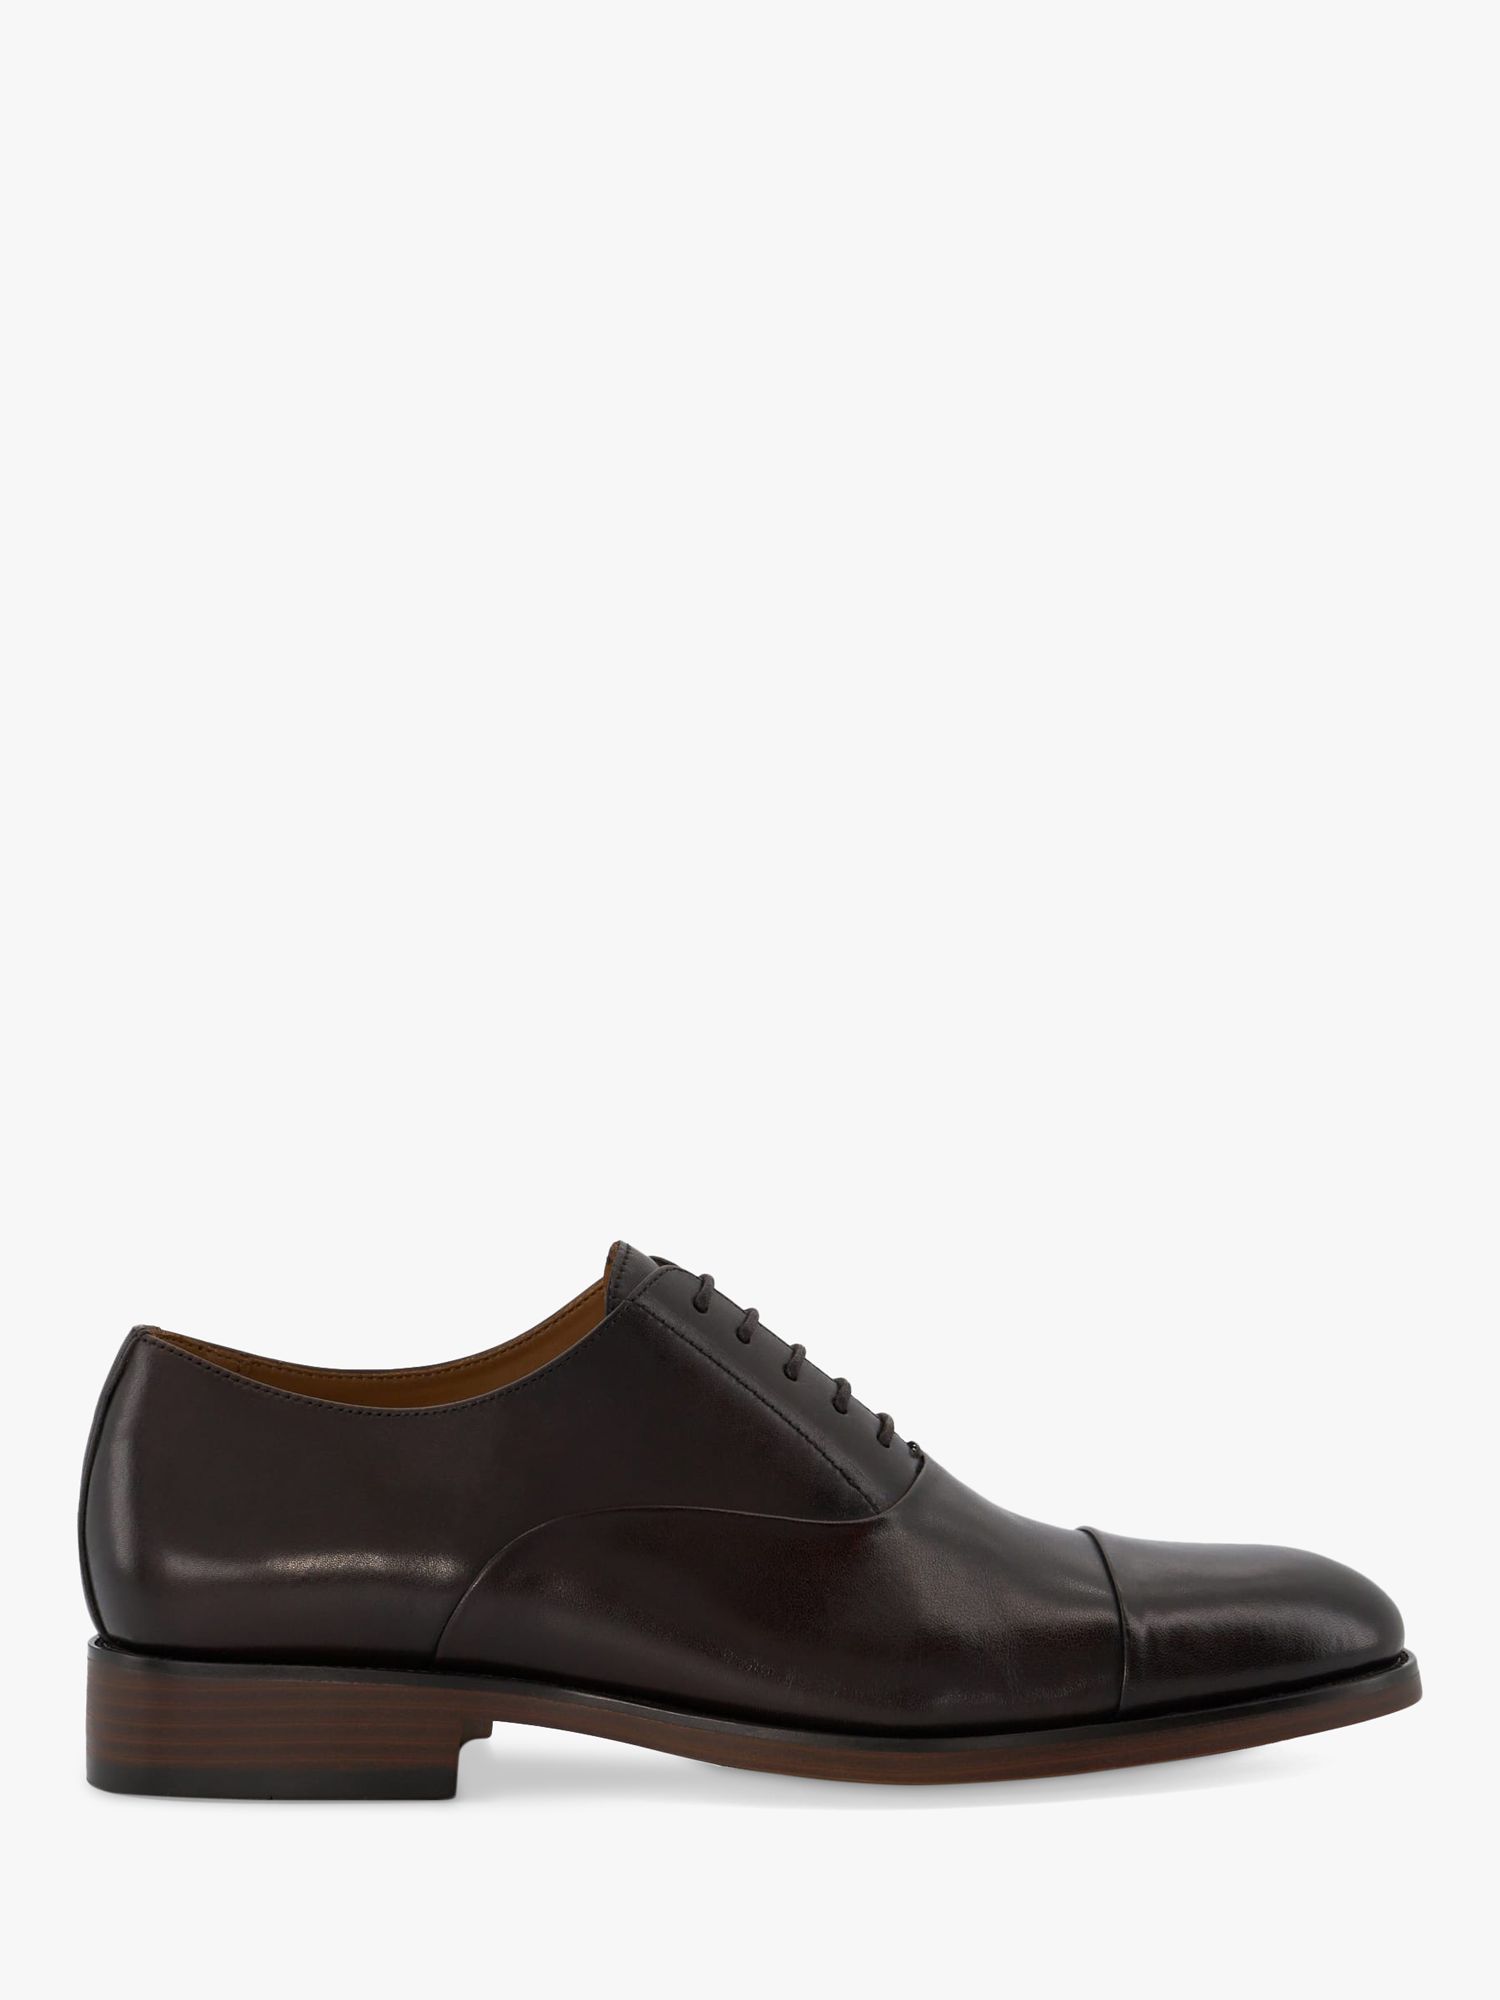 Dune Sebastian Lace Up Leather Shoes, Brown at John Lewis & Partners